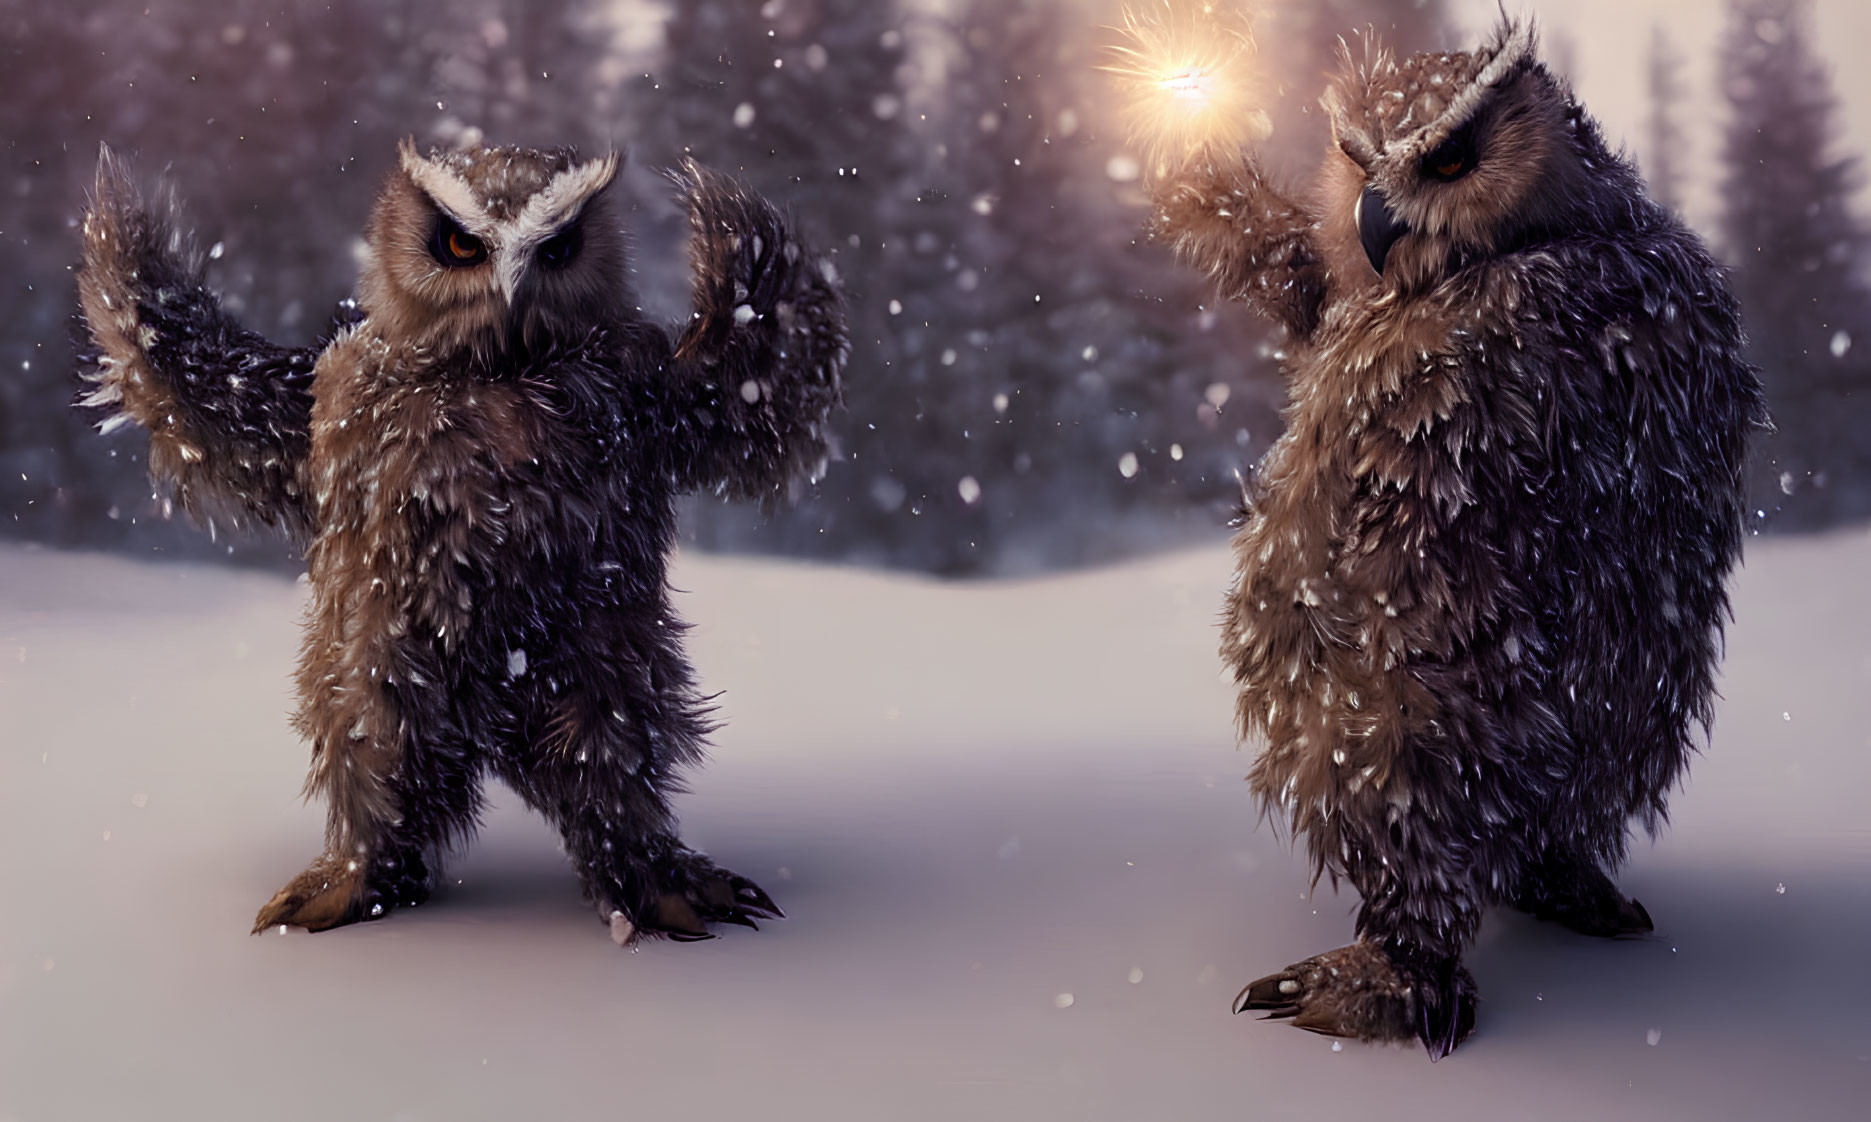 Anthropomorphic owls in snowy landscape with glowing light, under soft snowfall